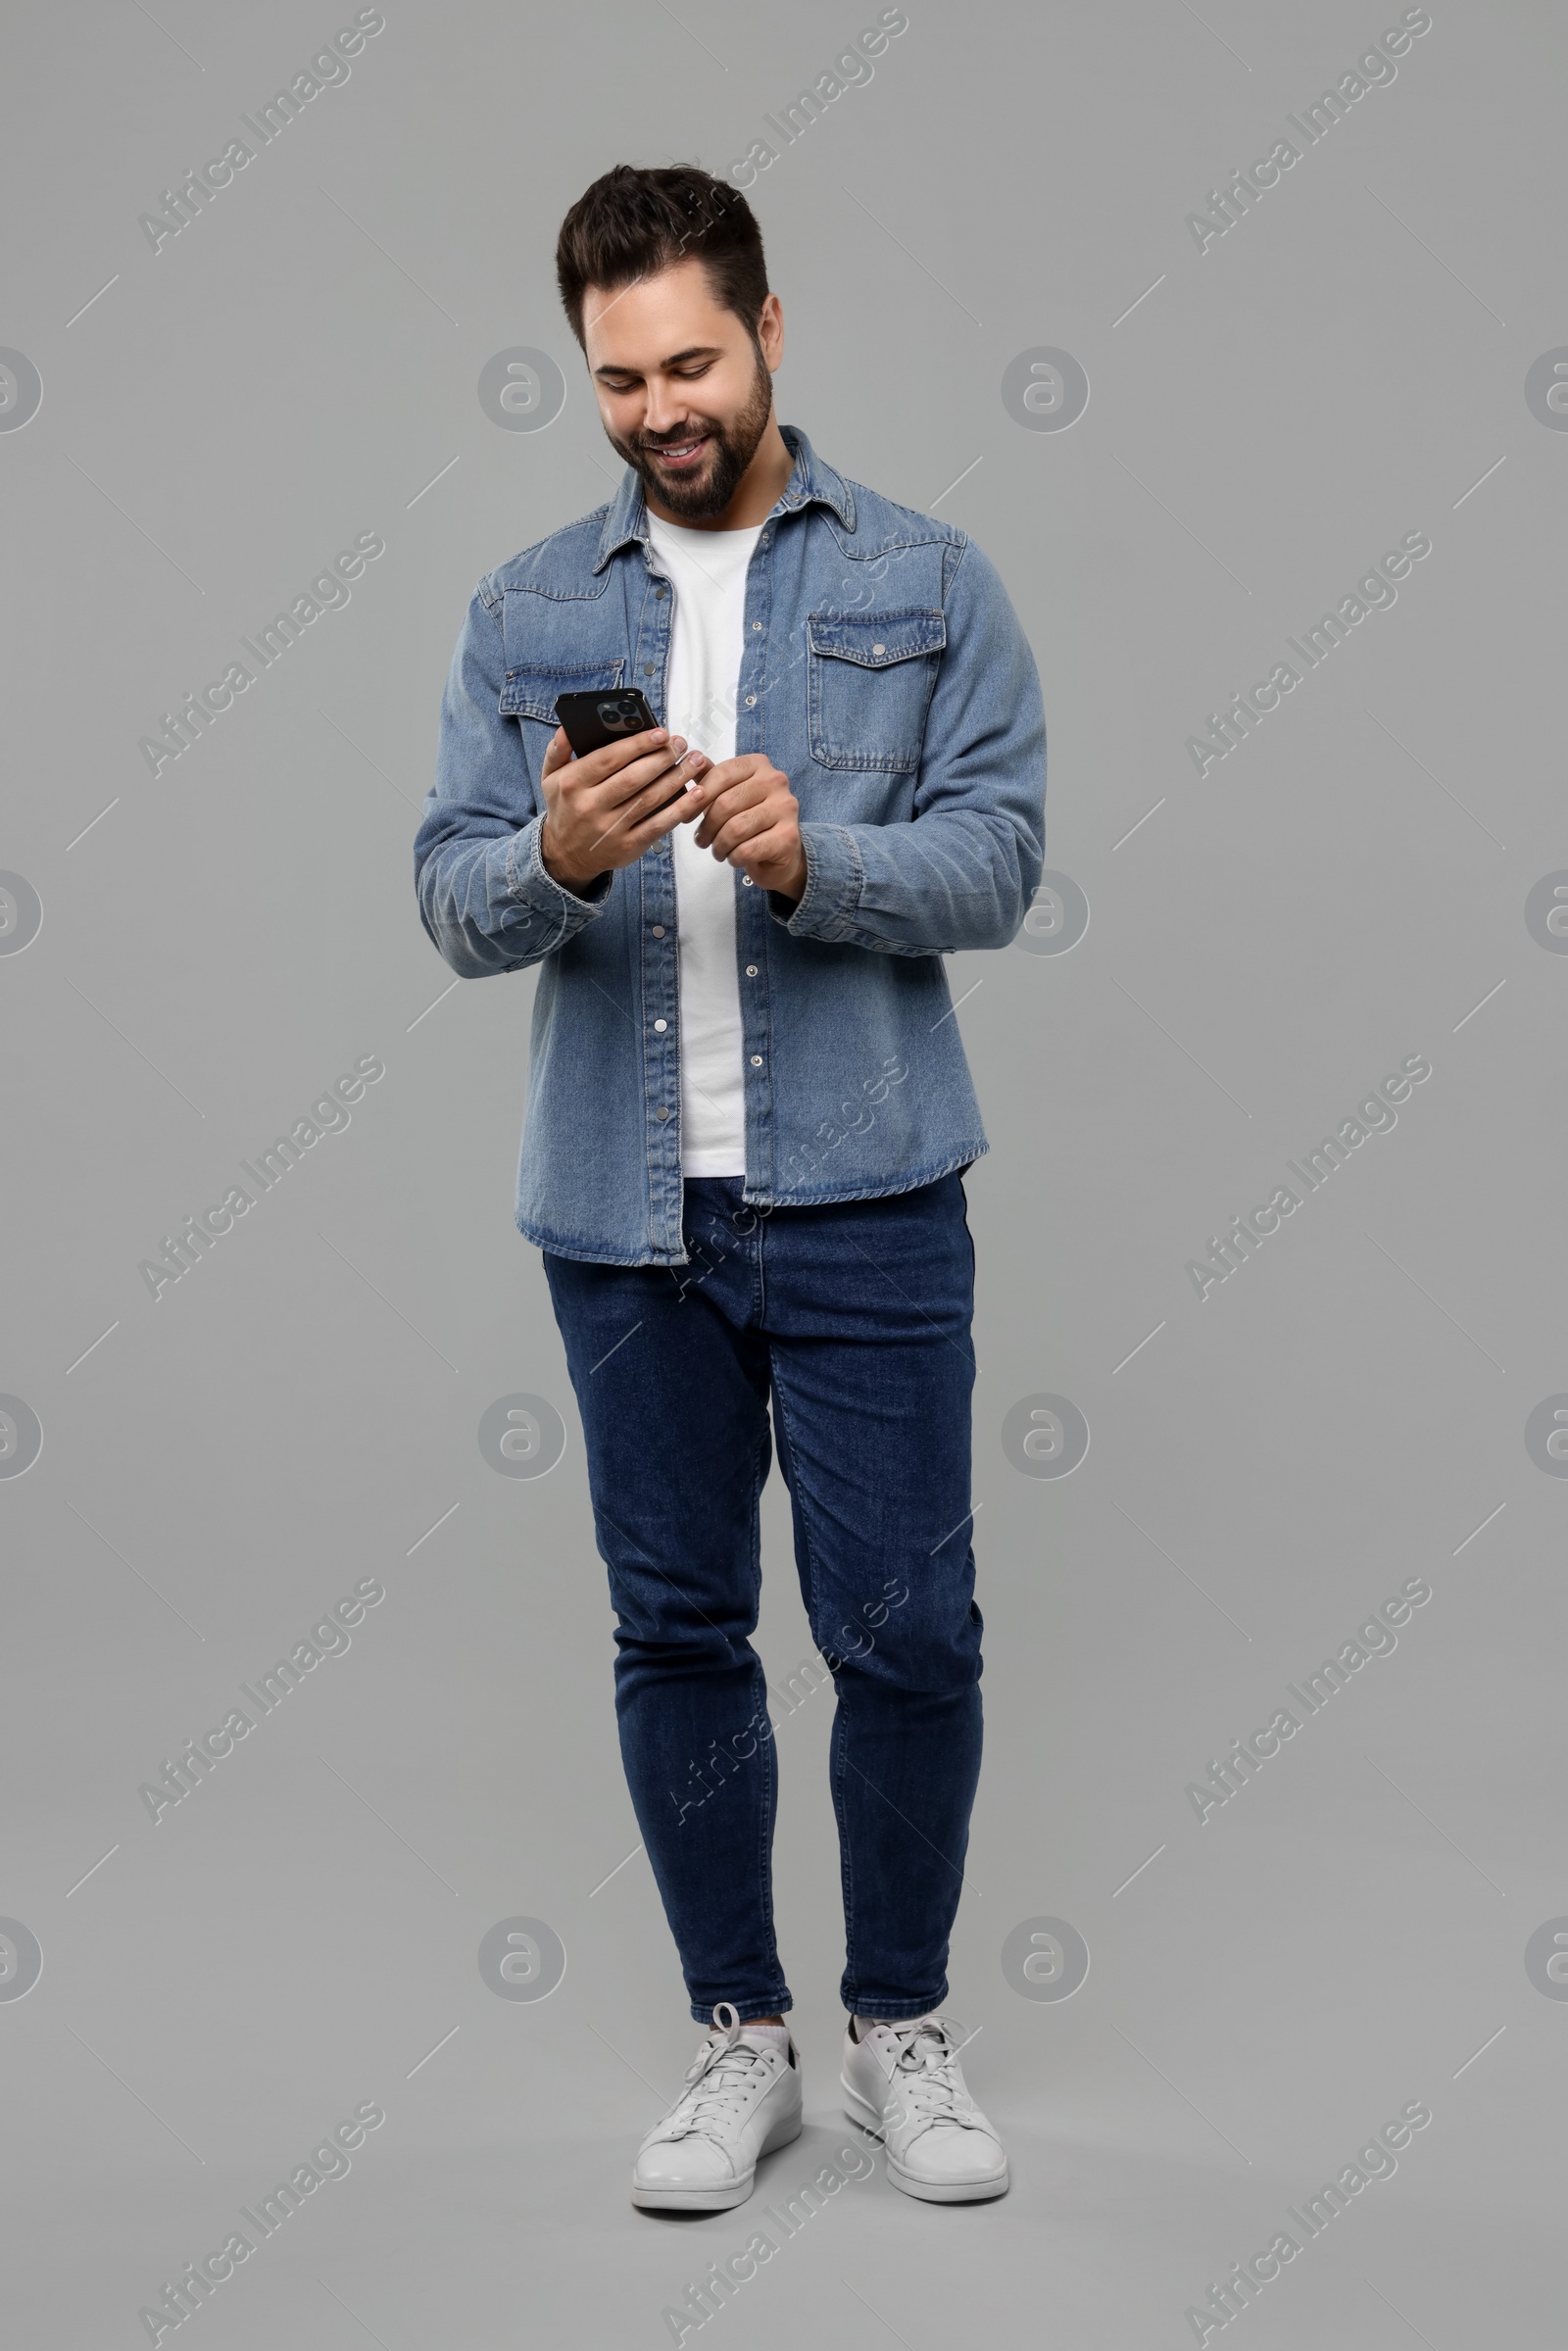 Photo of Happy young man using smartphone on grey background